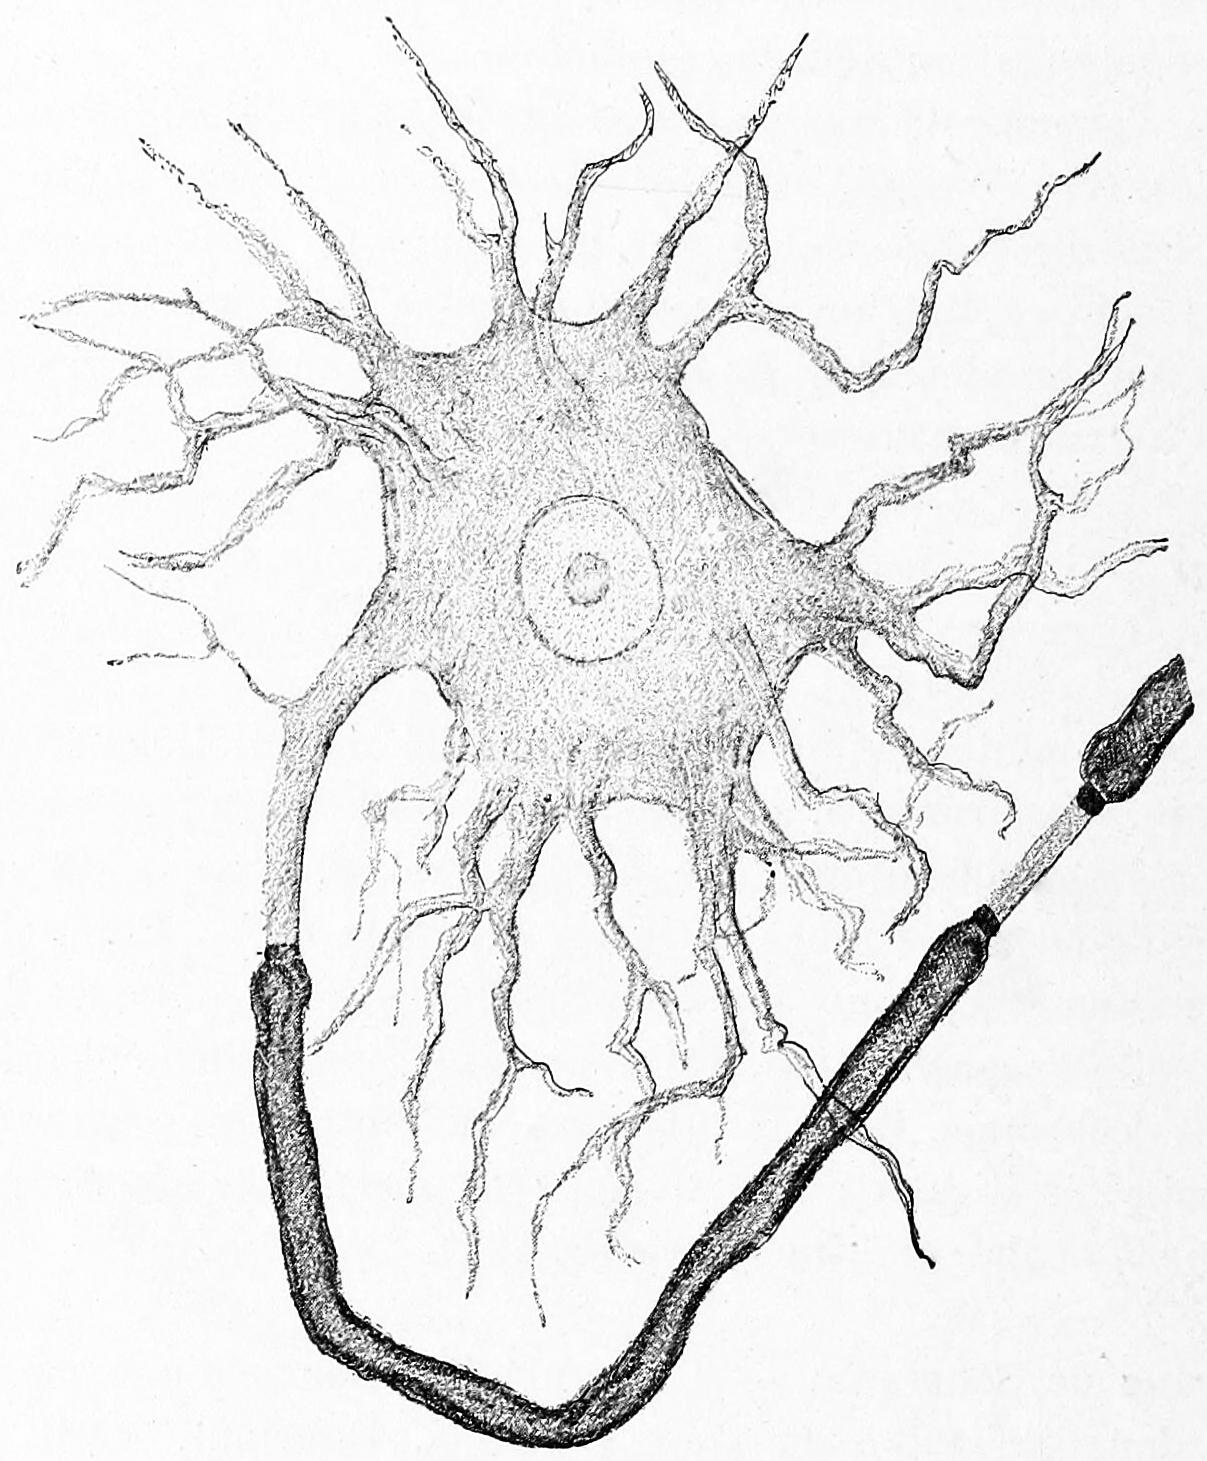 A Golgi type I neuron from the electric lobe in the brain of the electric ray (Torpedo). A single, thick axon emerges from the cell body unmyelinated (middle, left) but becomes surrounded by a think layer of myelin (dark grey). Multiple, thin dendrites emerge from the remainder of the cell body. Histologie du système nerveux de l’homme & des vertébrés, Tome Premier (1909) by Santiago Ramón y Cajal translated from Spanish by Dr. L. Azoulay.